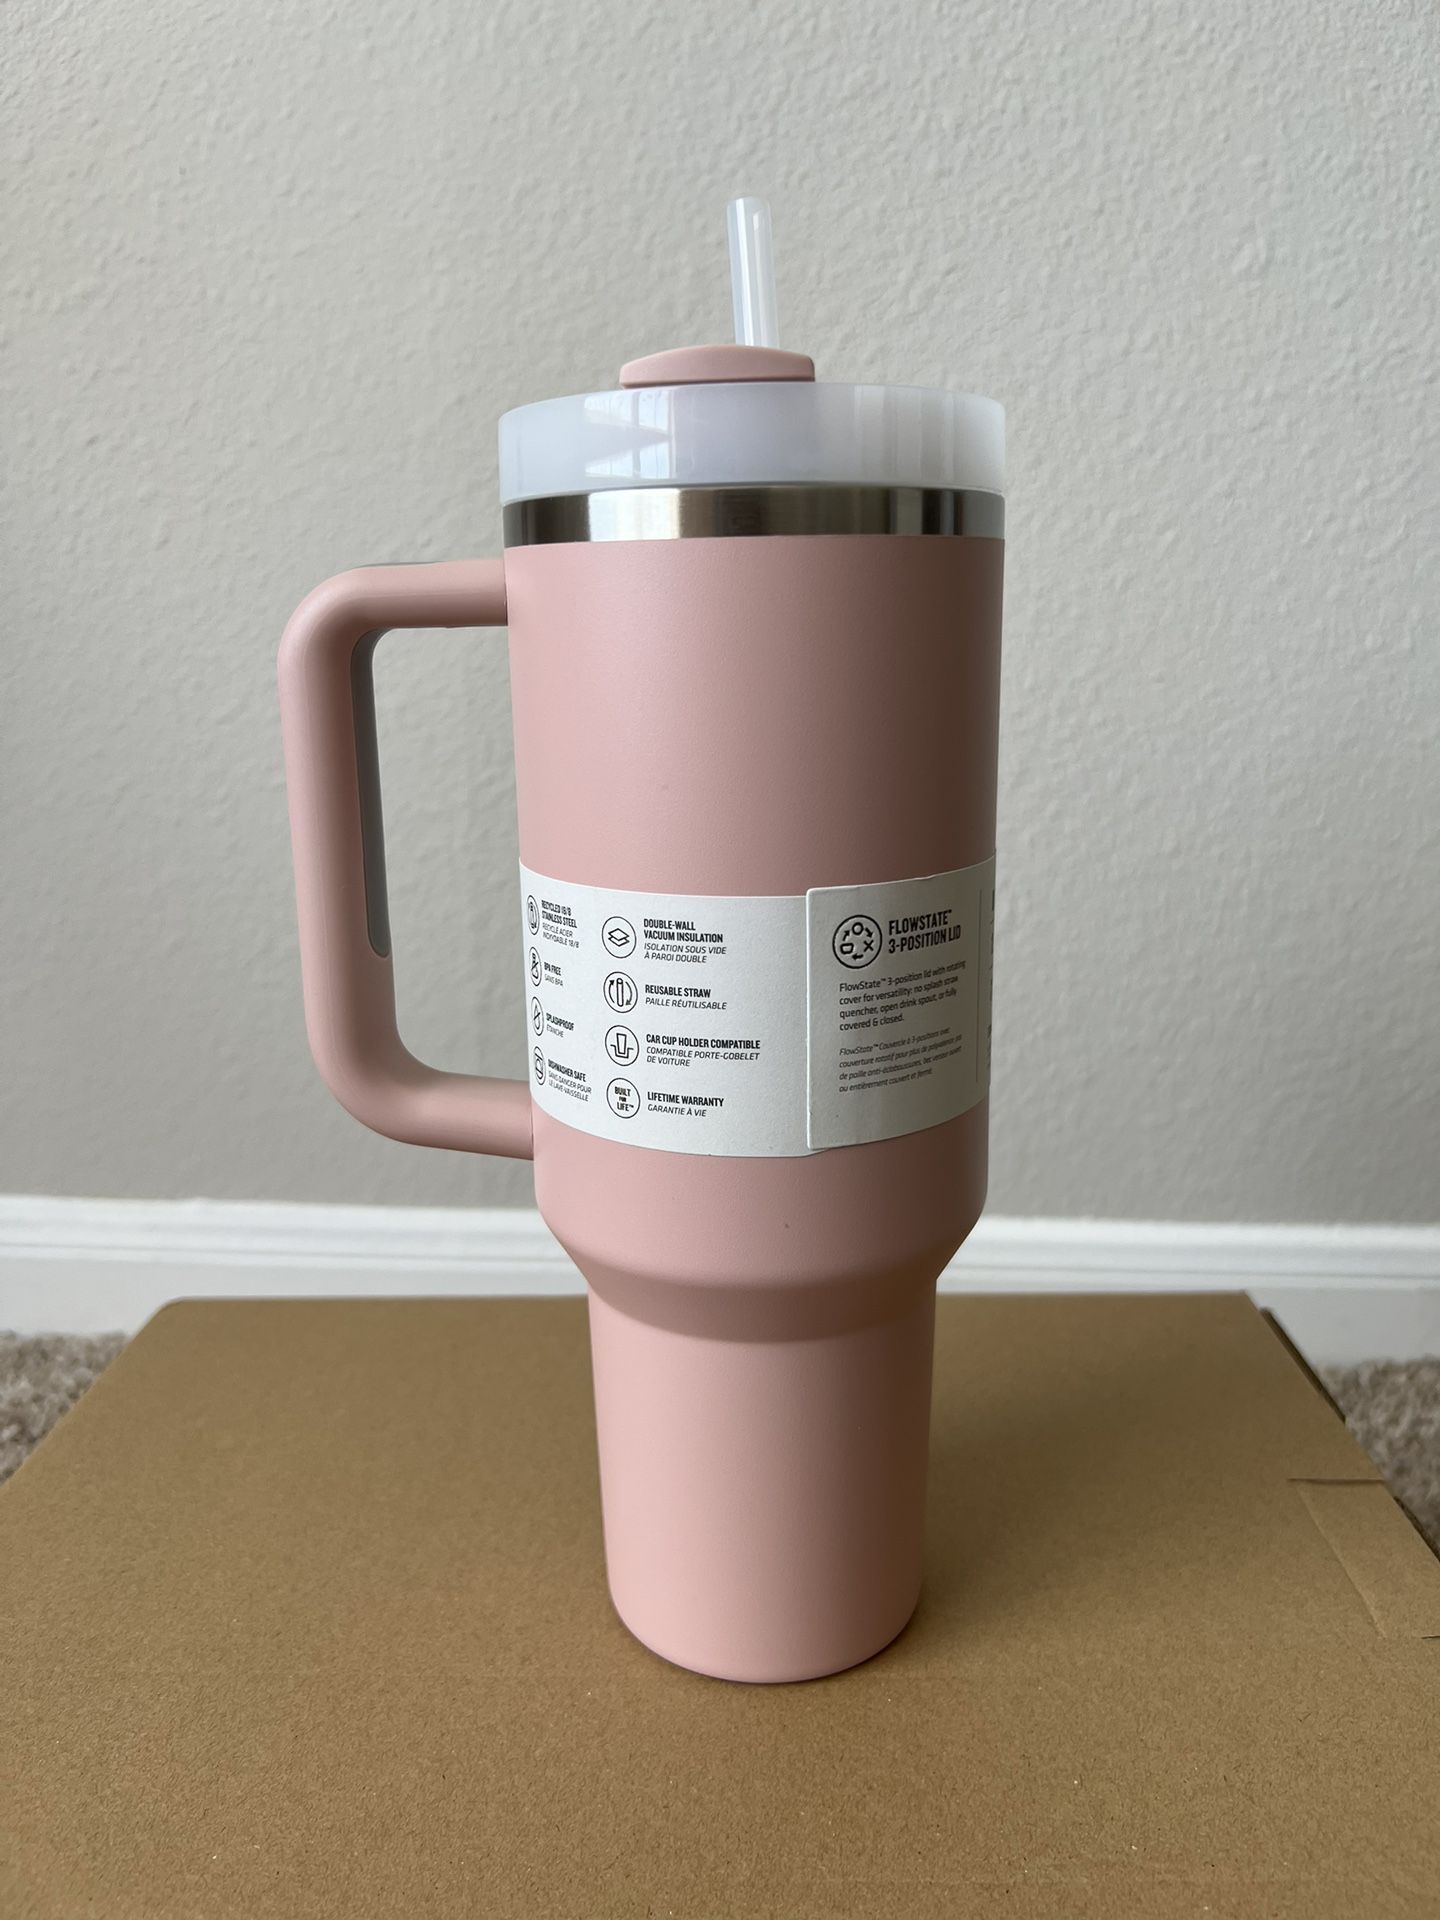 Stanley Pink Parade LIMITED EDITION 40 oz H2.0 Flowstate Tumbler for Sale  in Lake Worth, FL - OfferUp